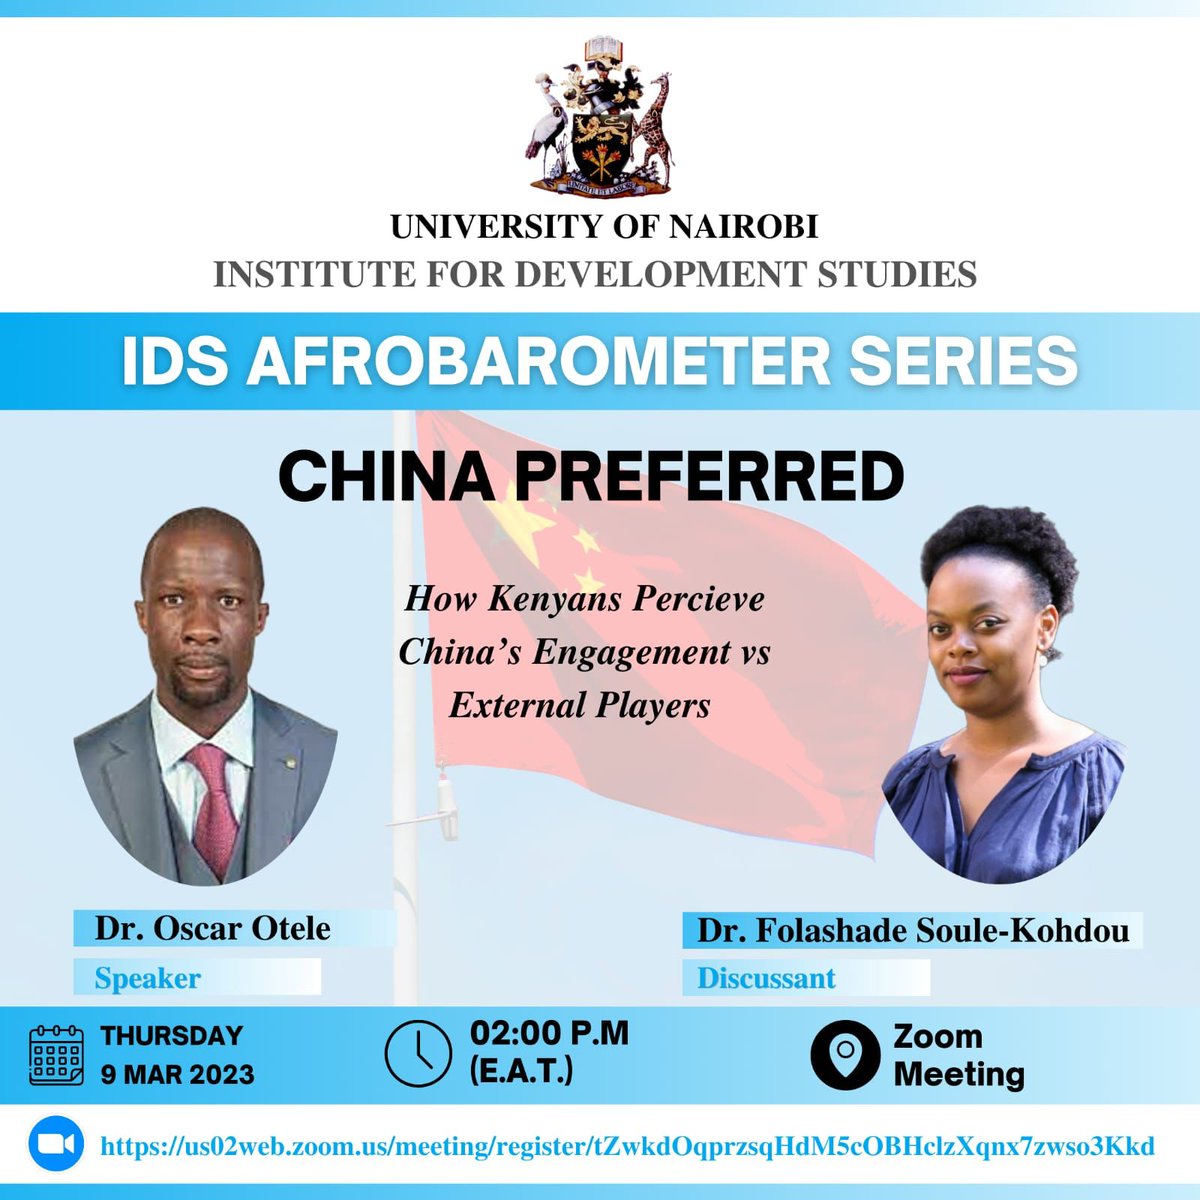 'Over the years, study has shown that men have a negative perspective on the influence of China towards the economy of Africa compared to women,' Dr. Oscar Otele @uonbi #IsChinaPreferred #WeAreUoN